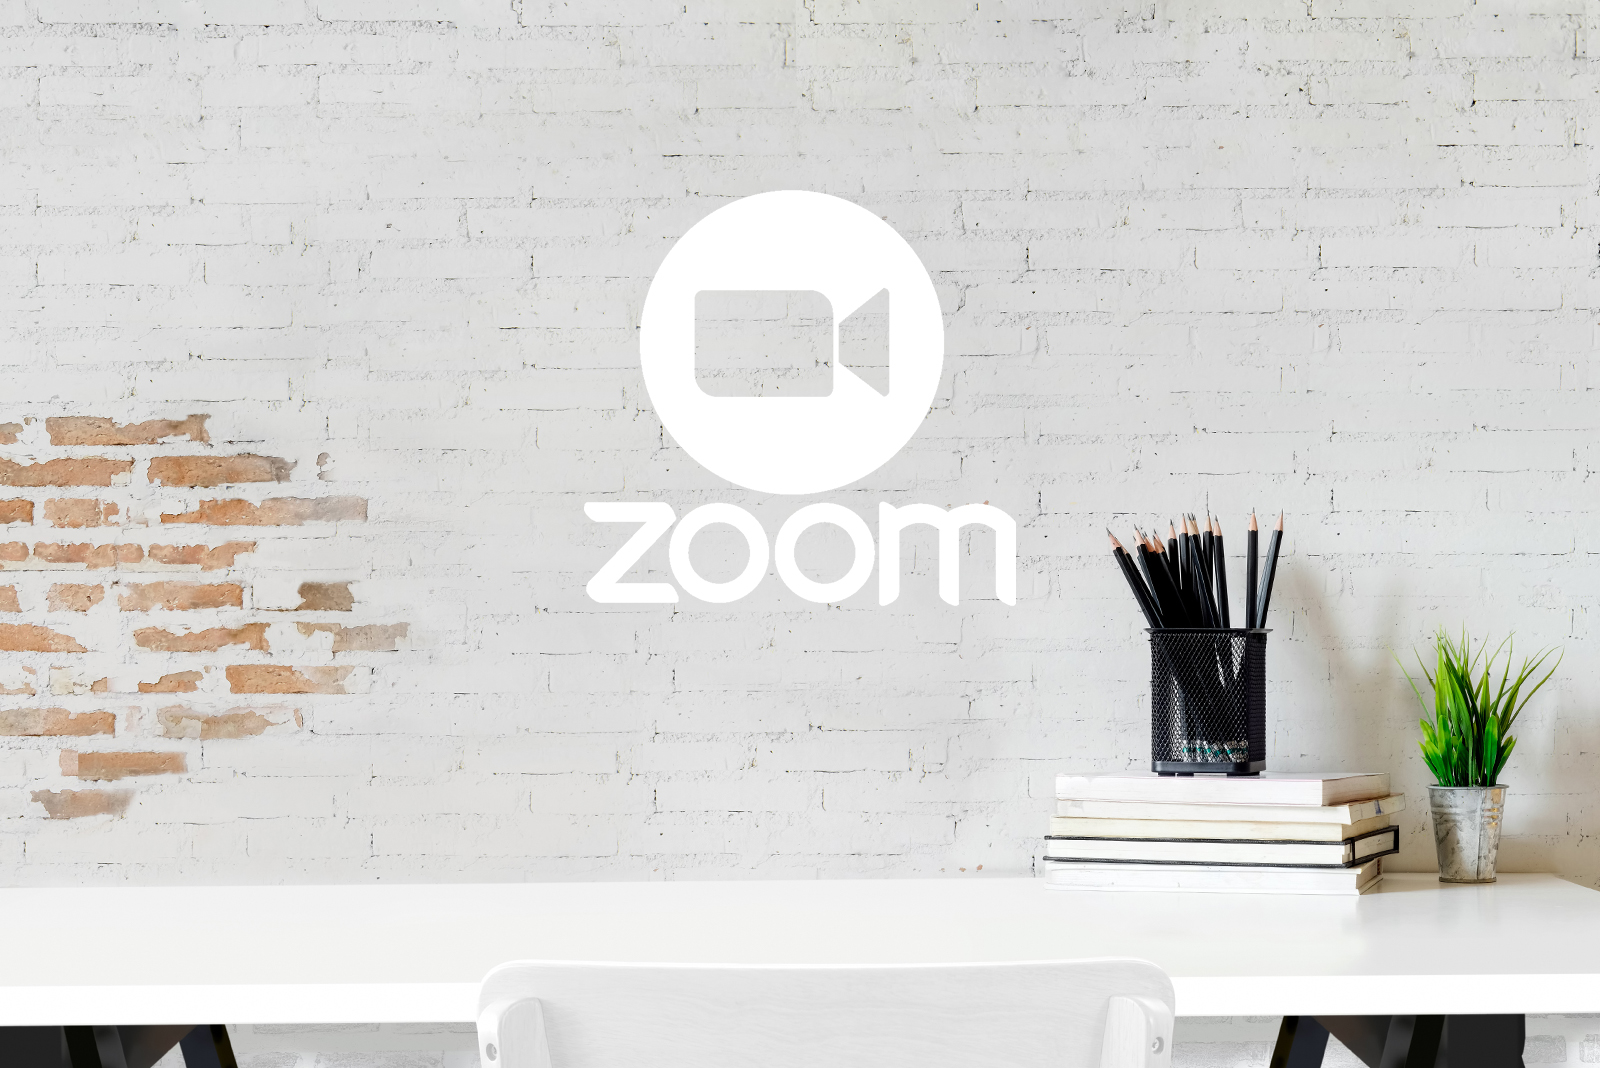 White brick wall, desk, chair with various stationary items with the zoom logo on top - White Canvas Design